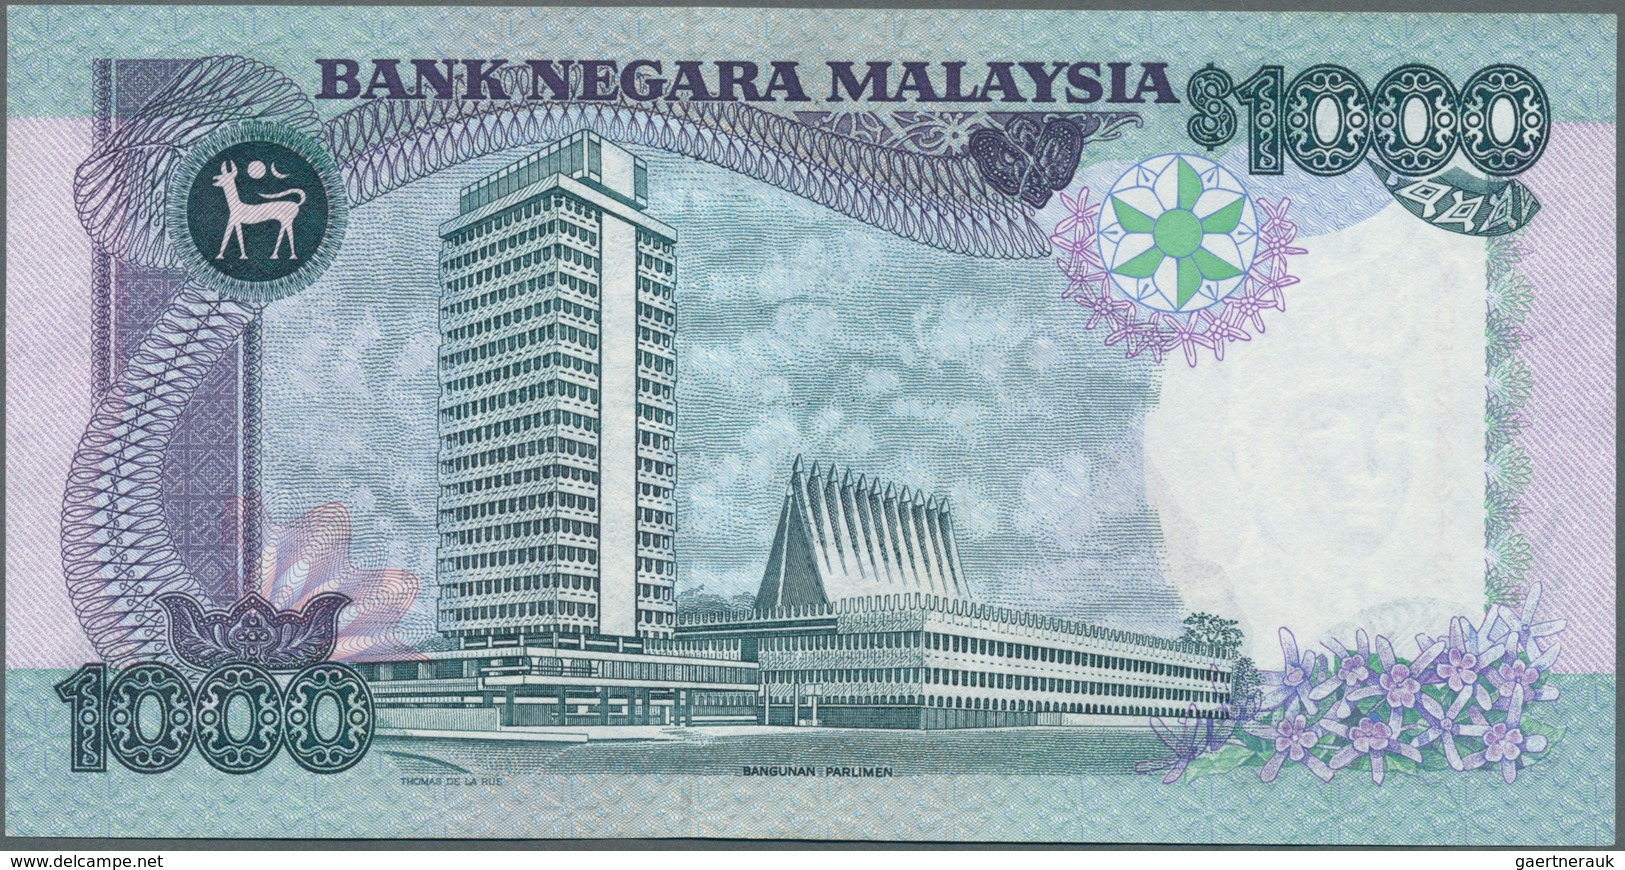 01994 Malaysia: 1000 Ringgit ND P. 34, In Condition: AUNC. - Malaysia